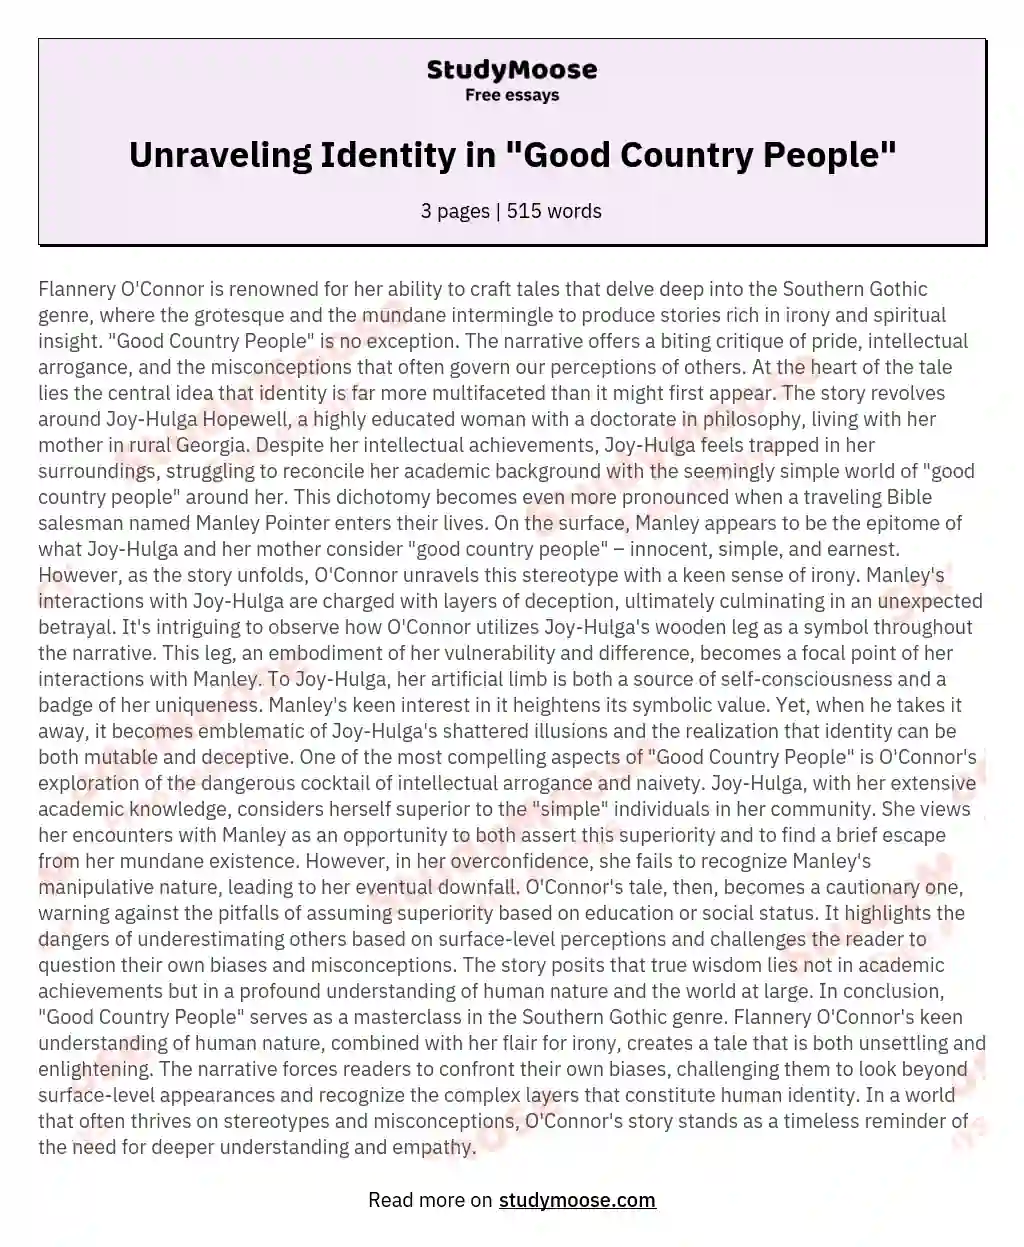 Unraveling Identity in "Good Country People" essay